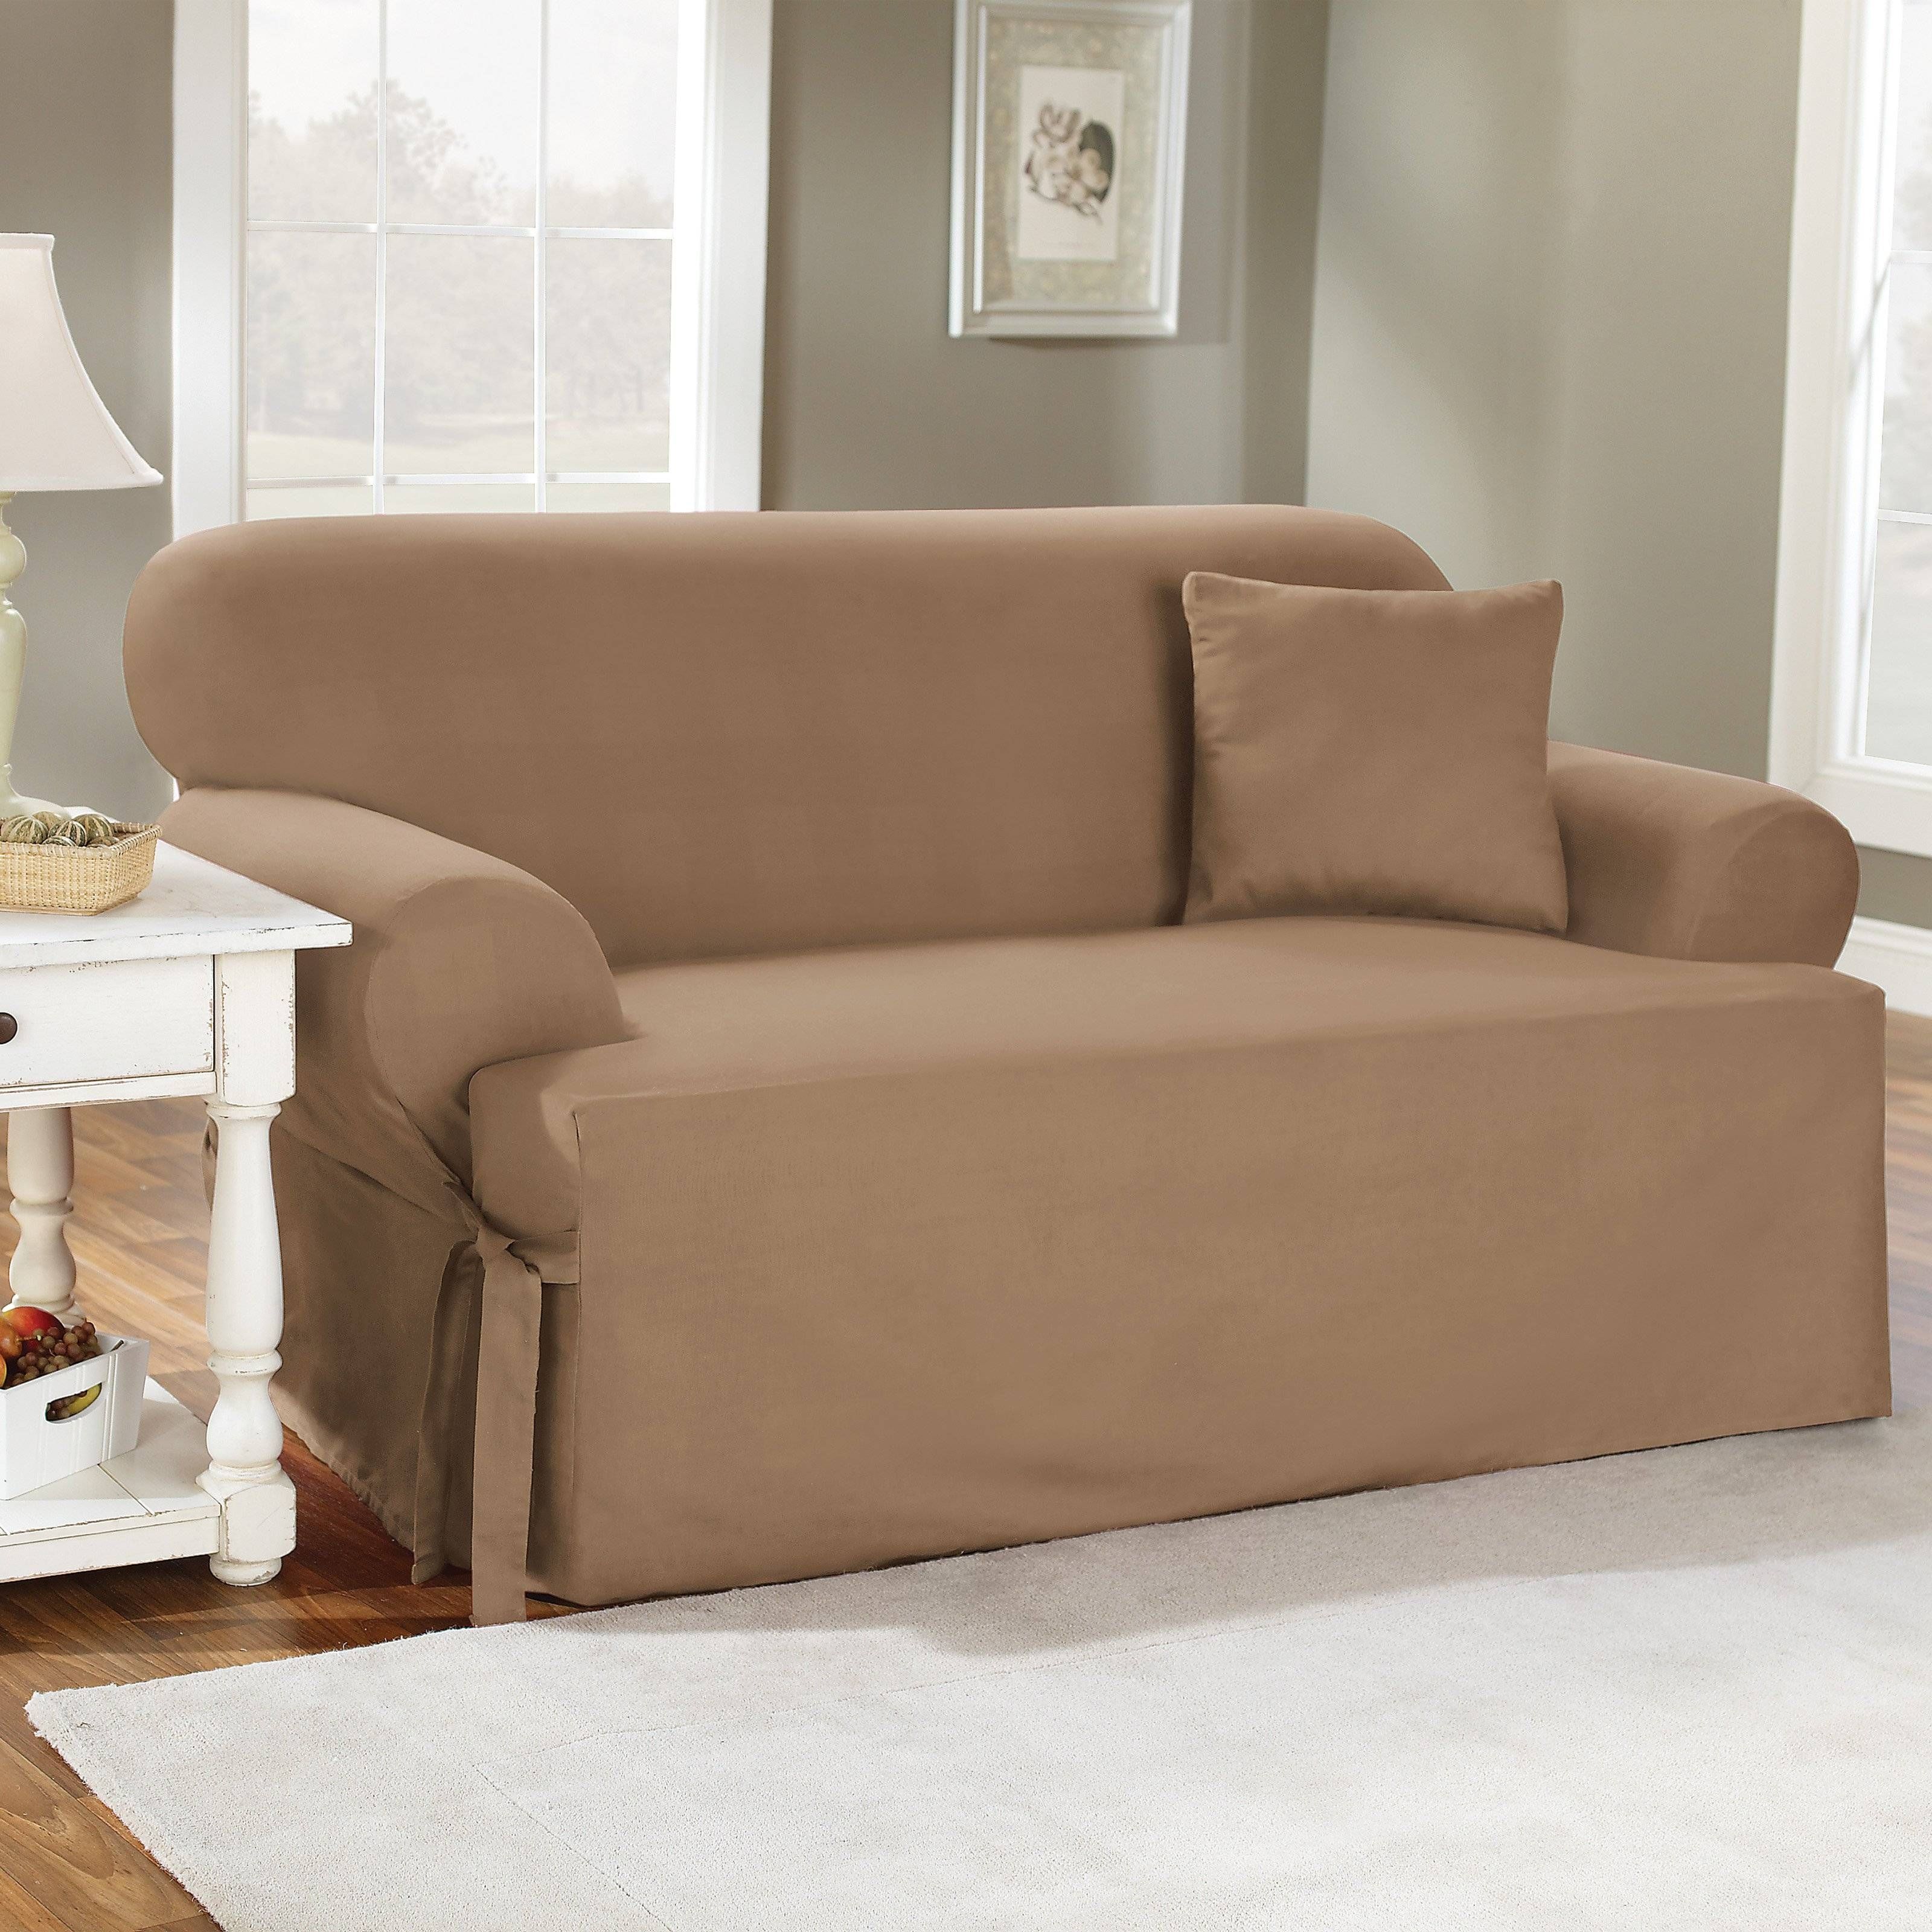 Furniture & Sofa: Stunning Sure Fit Sofa Covers Design For Regarding Armless Sofa Slipcovers (View 8 of 15)